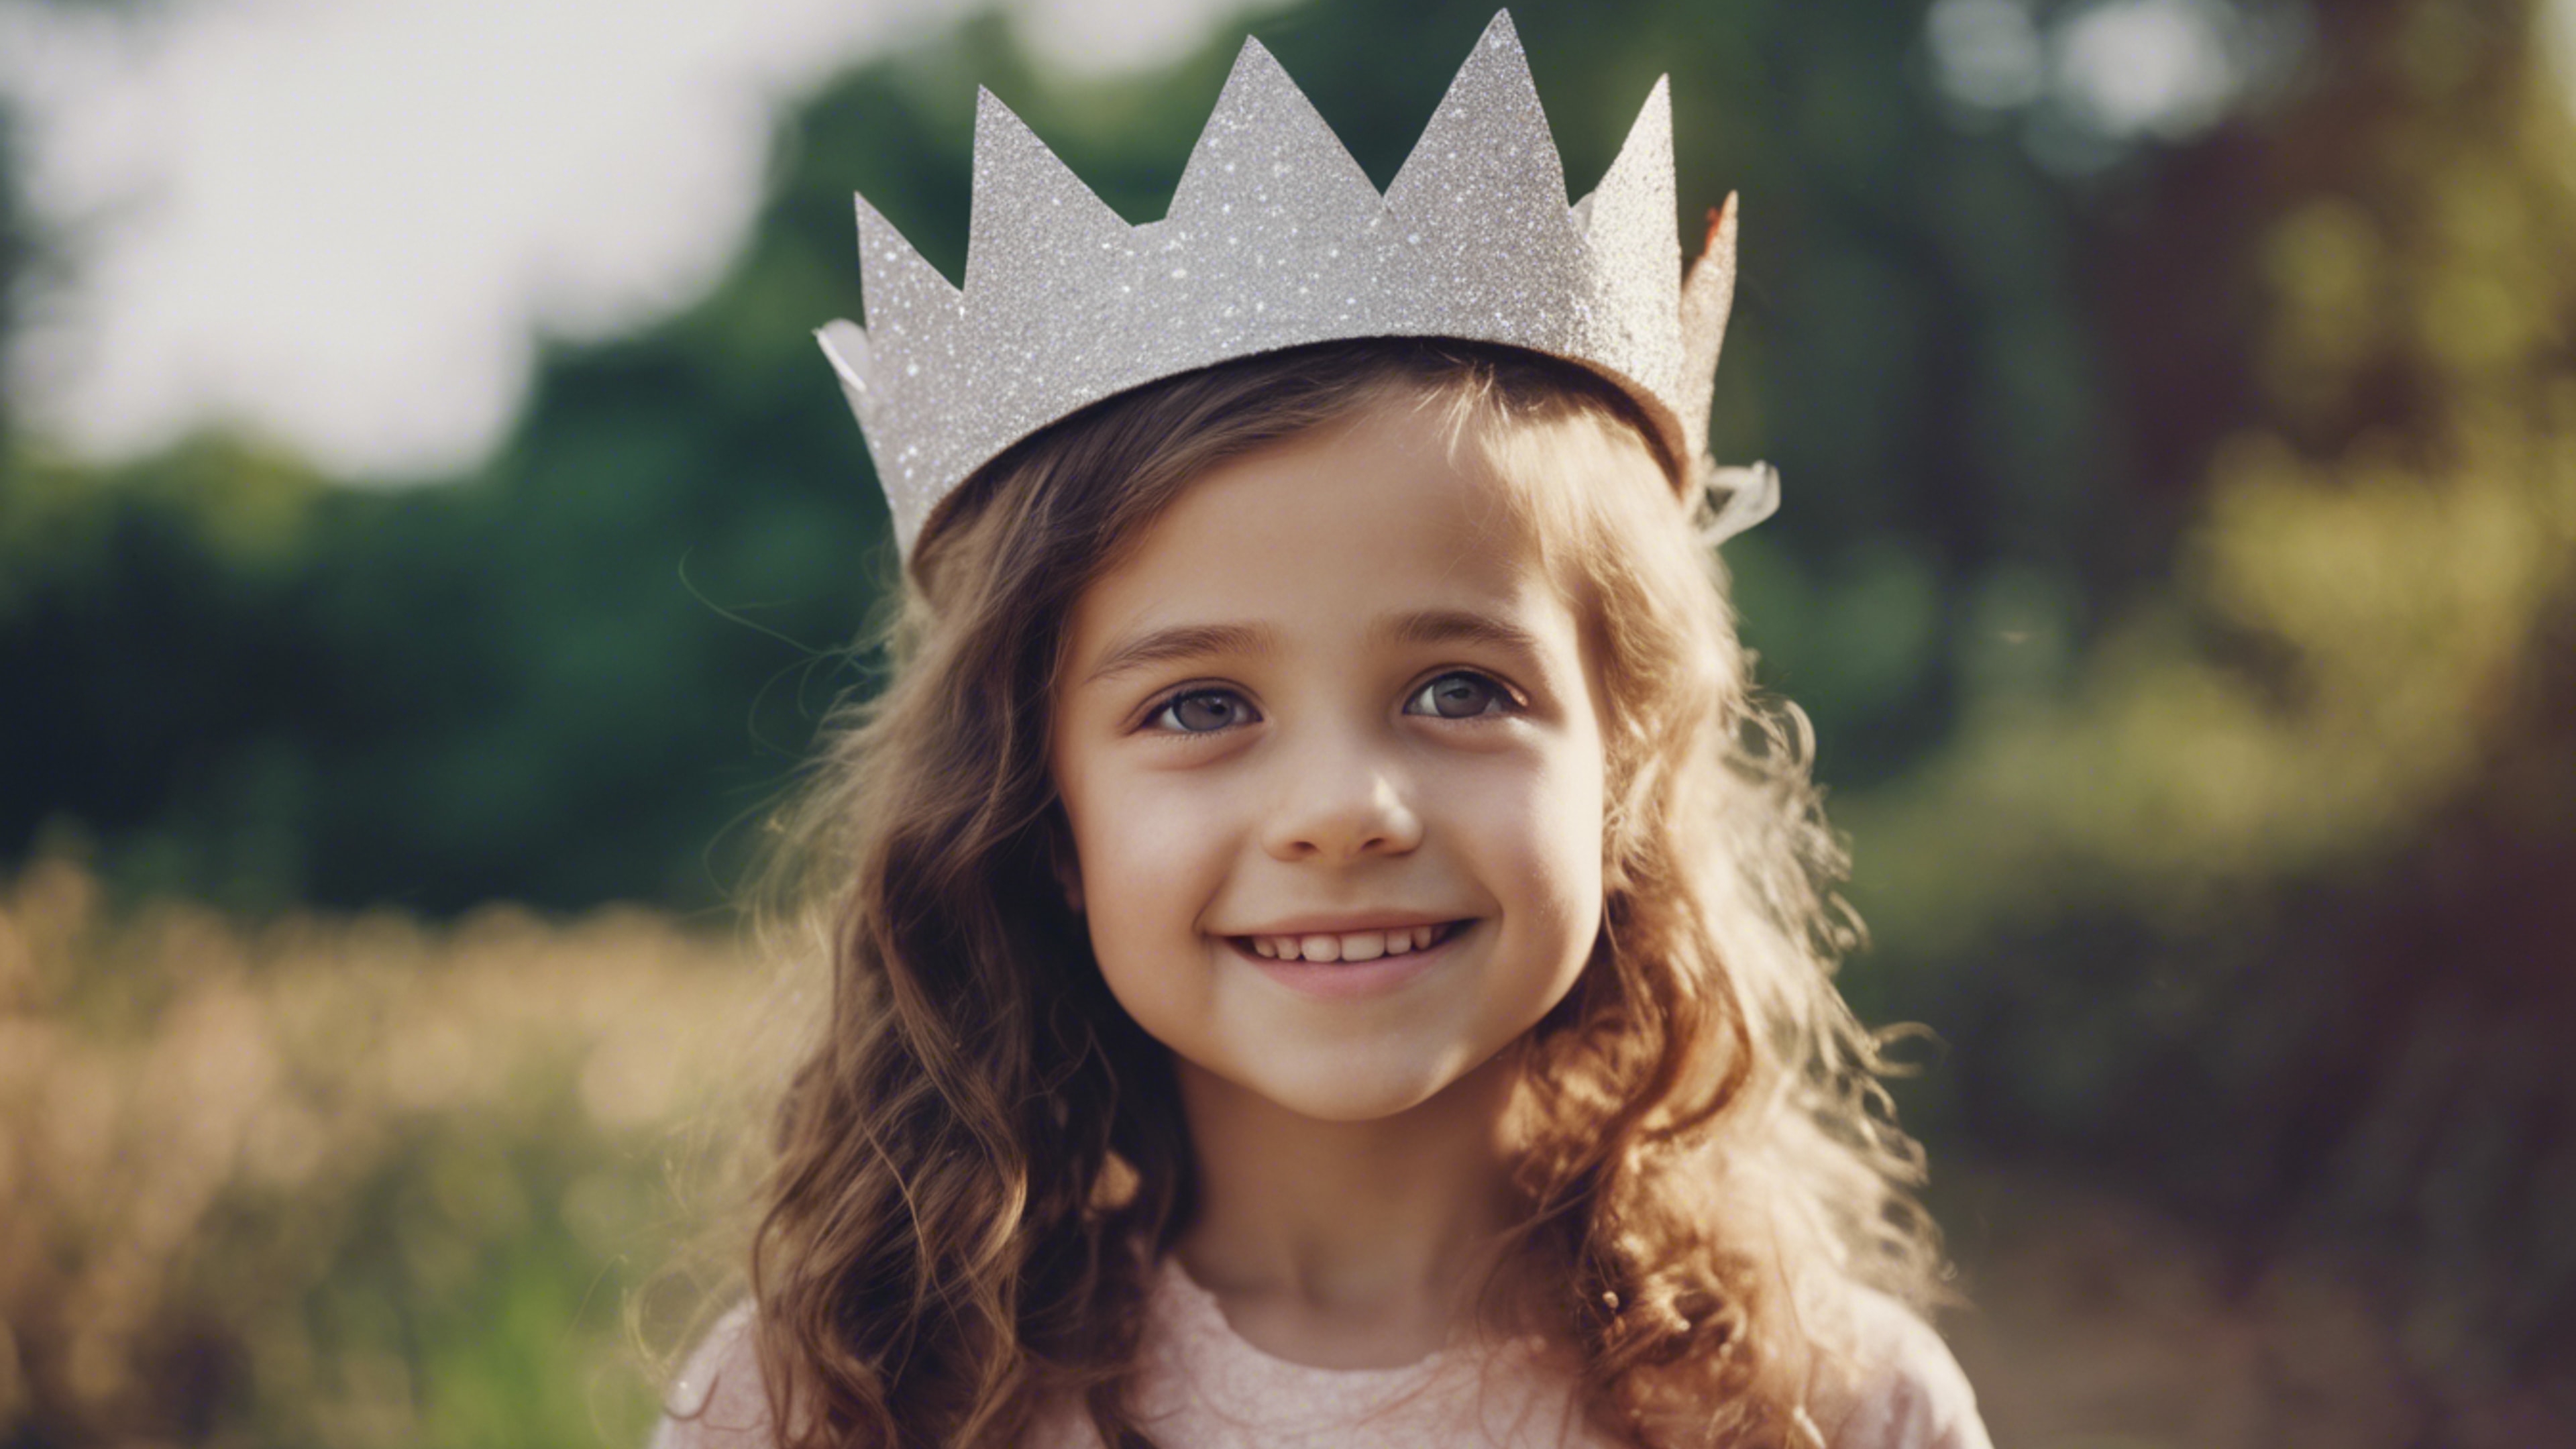 A young girl with sparkling eyes, happily wearing a homemade paper crown.壁紙[aa9d8265bf9b488b9728]